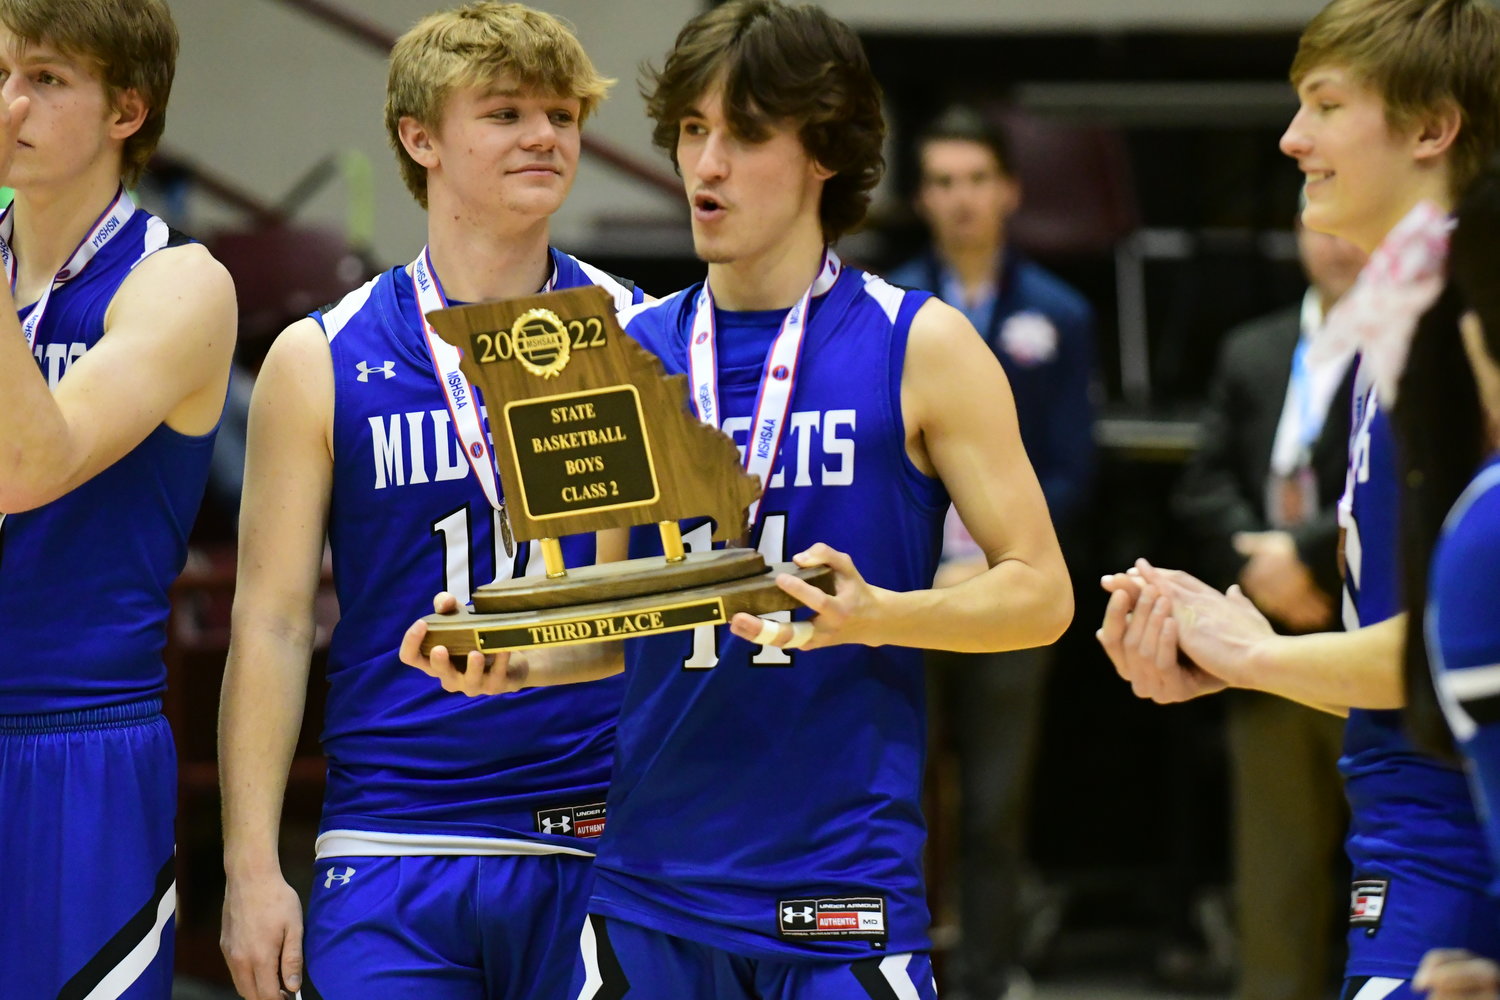 Photos from Putnam County’s Class 2 third-place game at the 2022 MSHSAA Show-Me Showdown, held on Saturday, March 12 at the Hammons Student Center in Springfield.